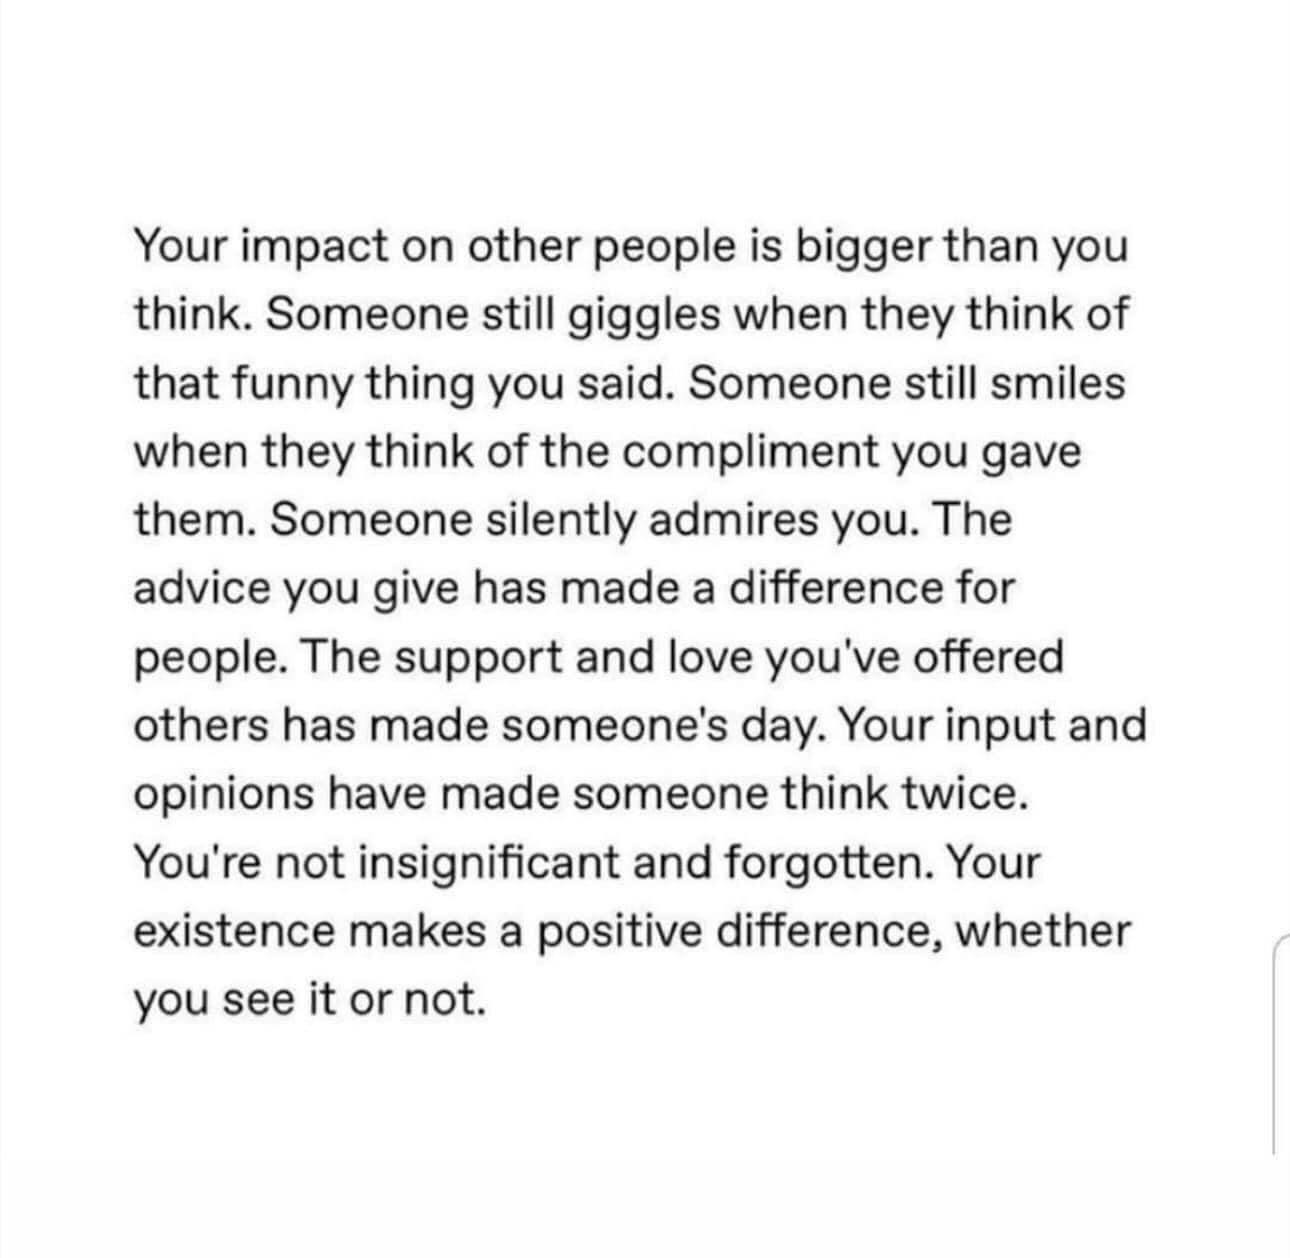 YOUR IMPACT ON OTHER PEOPLE
Your Impact on Others is Profound

Have you ever stopped to ponder the magnitude of your influence on those around you? 

It&rsquo;s easy to underestimate the ripple effect of our actions, words, and even our mere presence